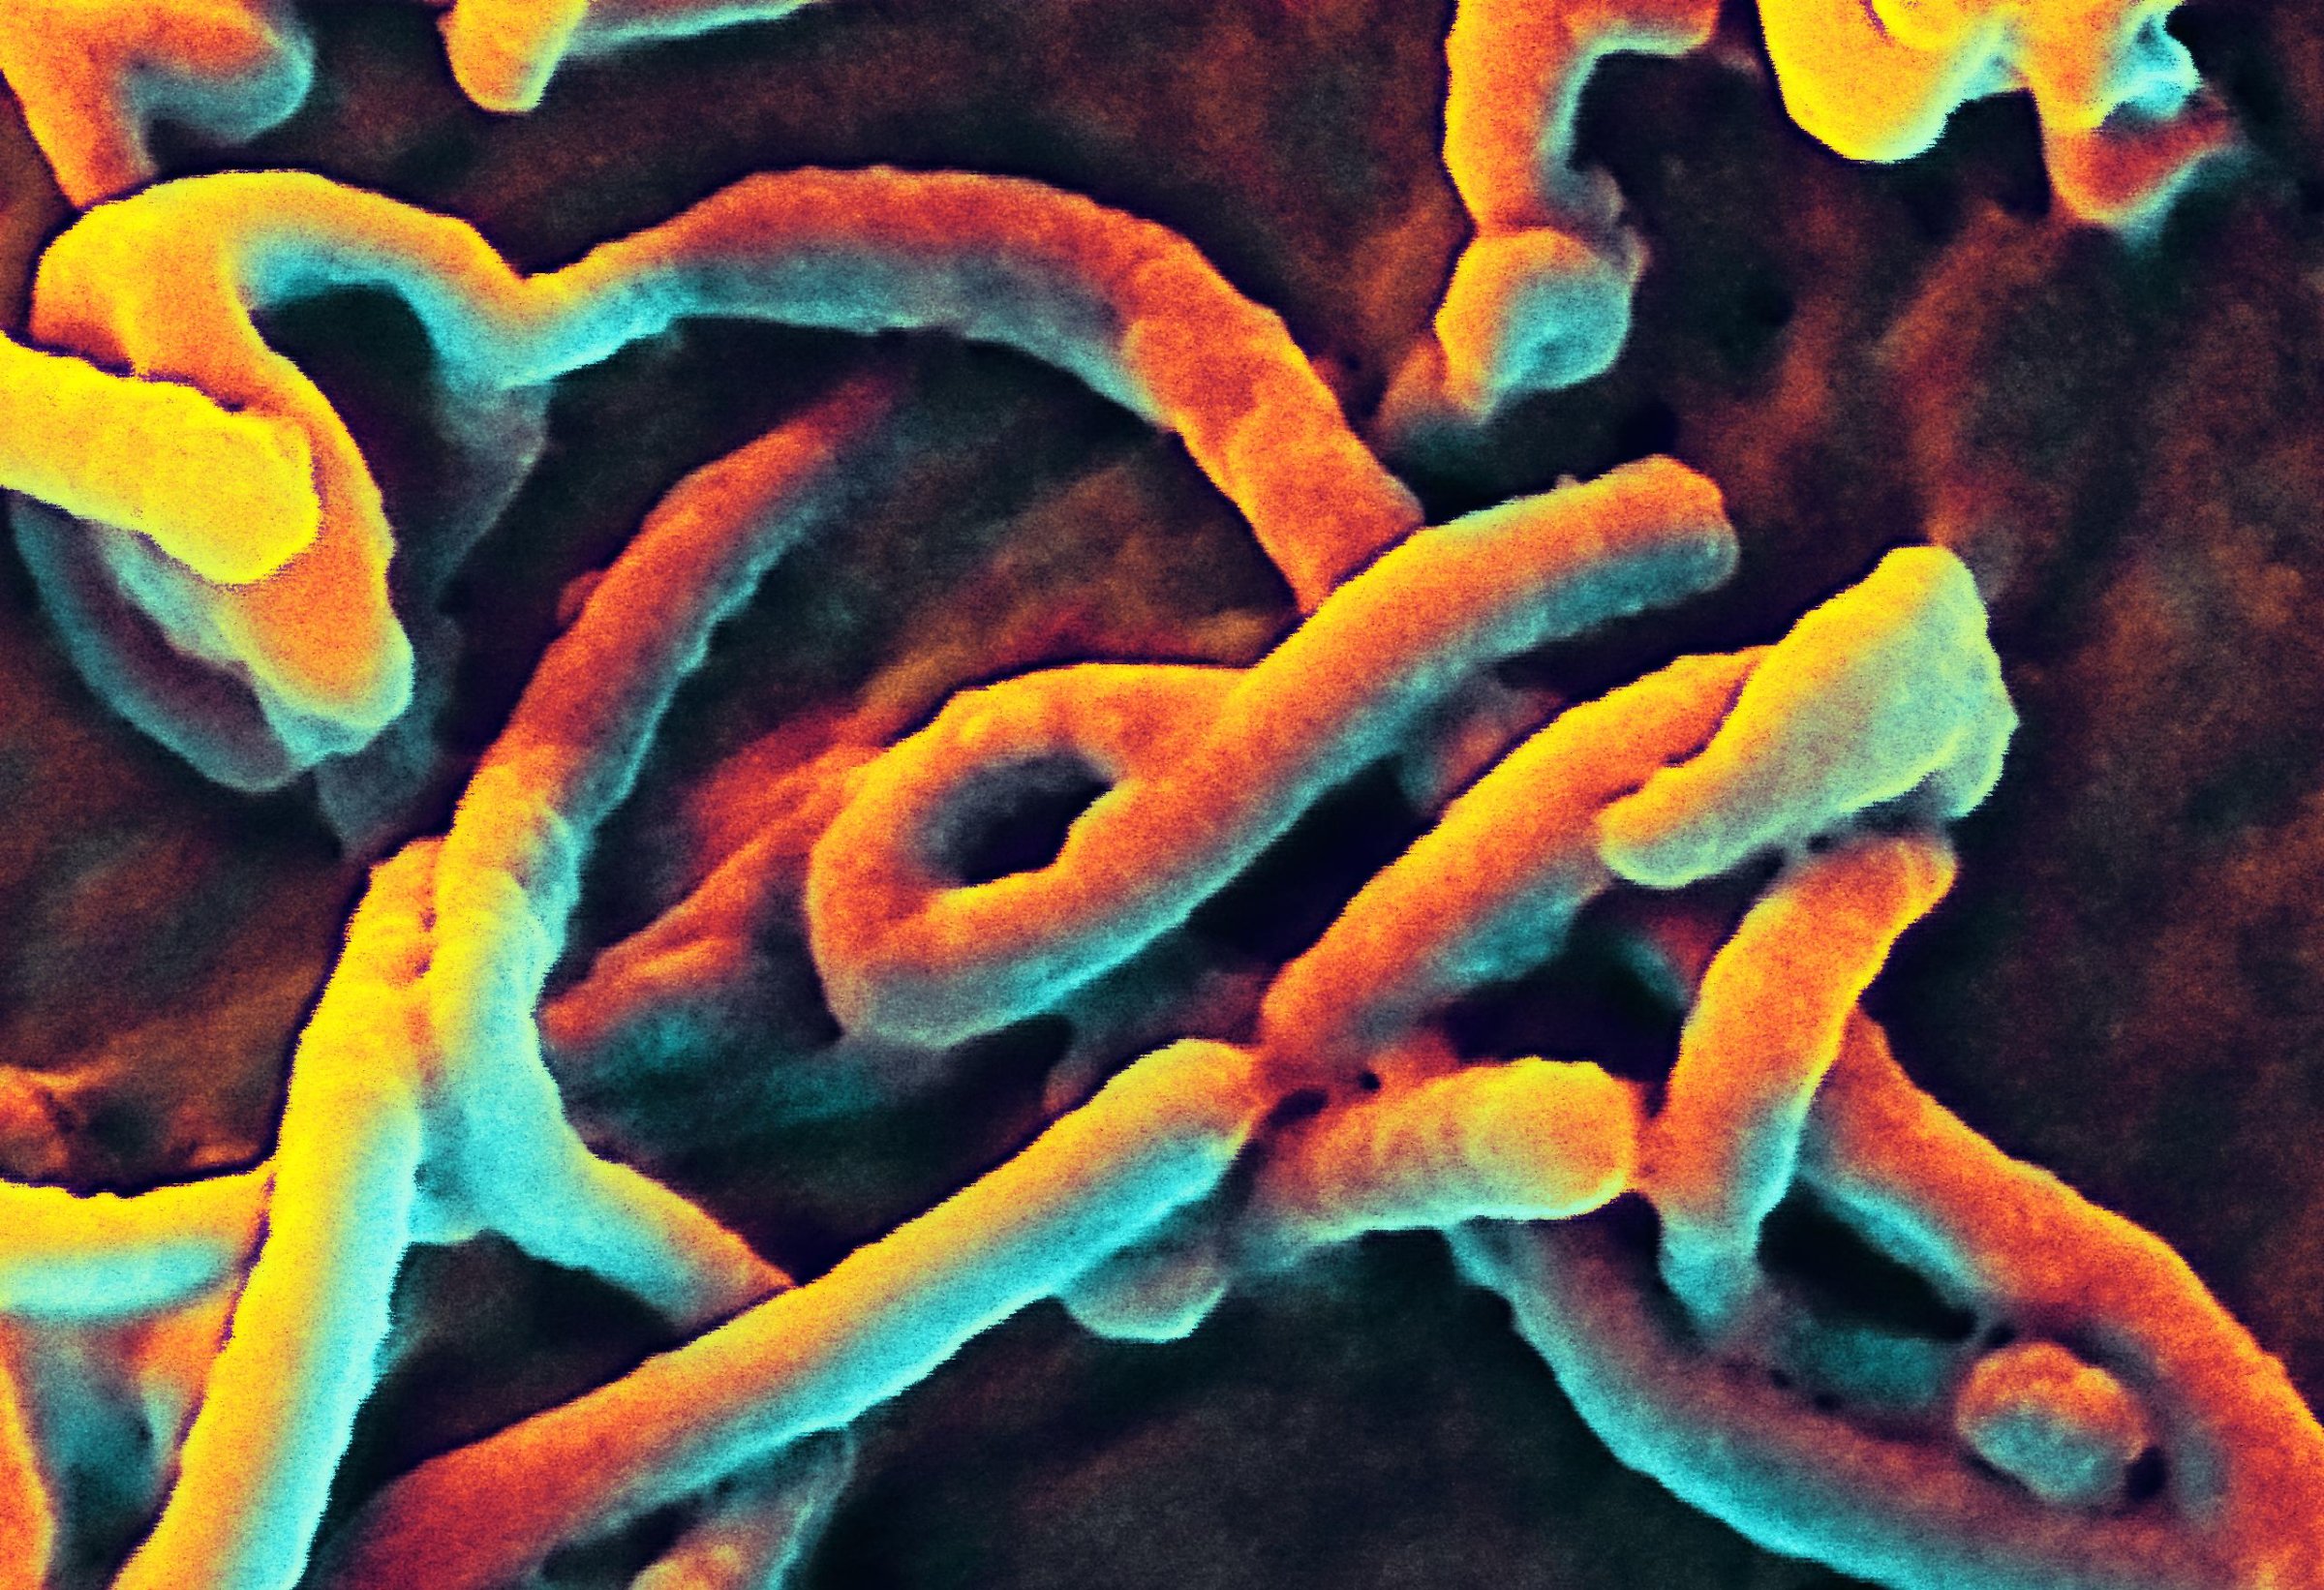 A scanning electron micrograph of Ebola virus budding from the surface of a Vero cell of an African green monkey kidney epithelial cell line.